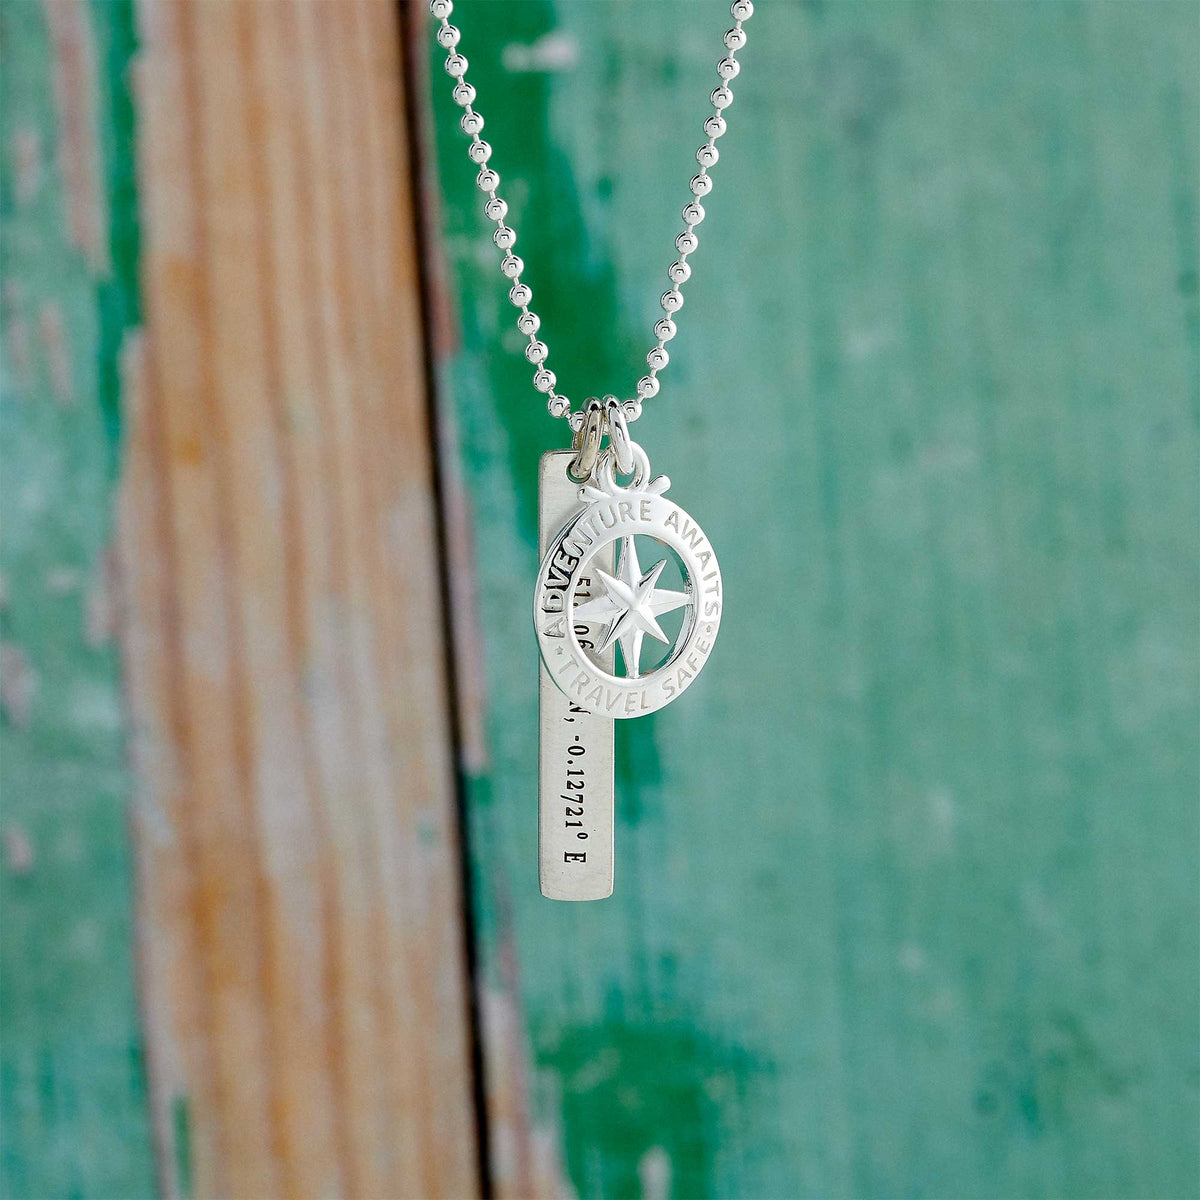 coordinated latitude longitude engraved compass necklace gift for son daughter going away travel gift remind of home